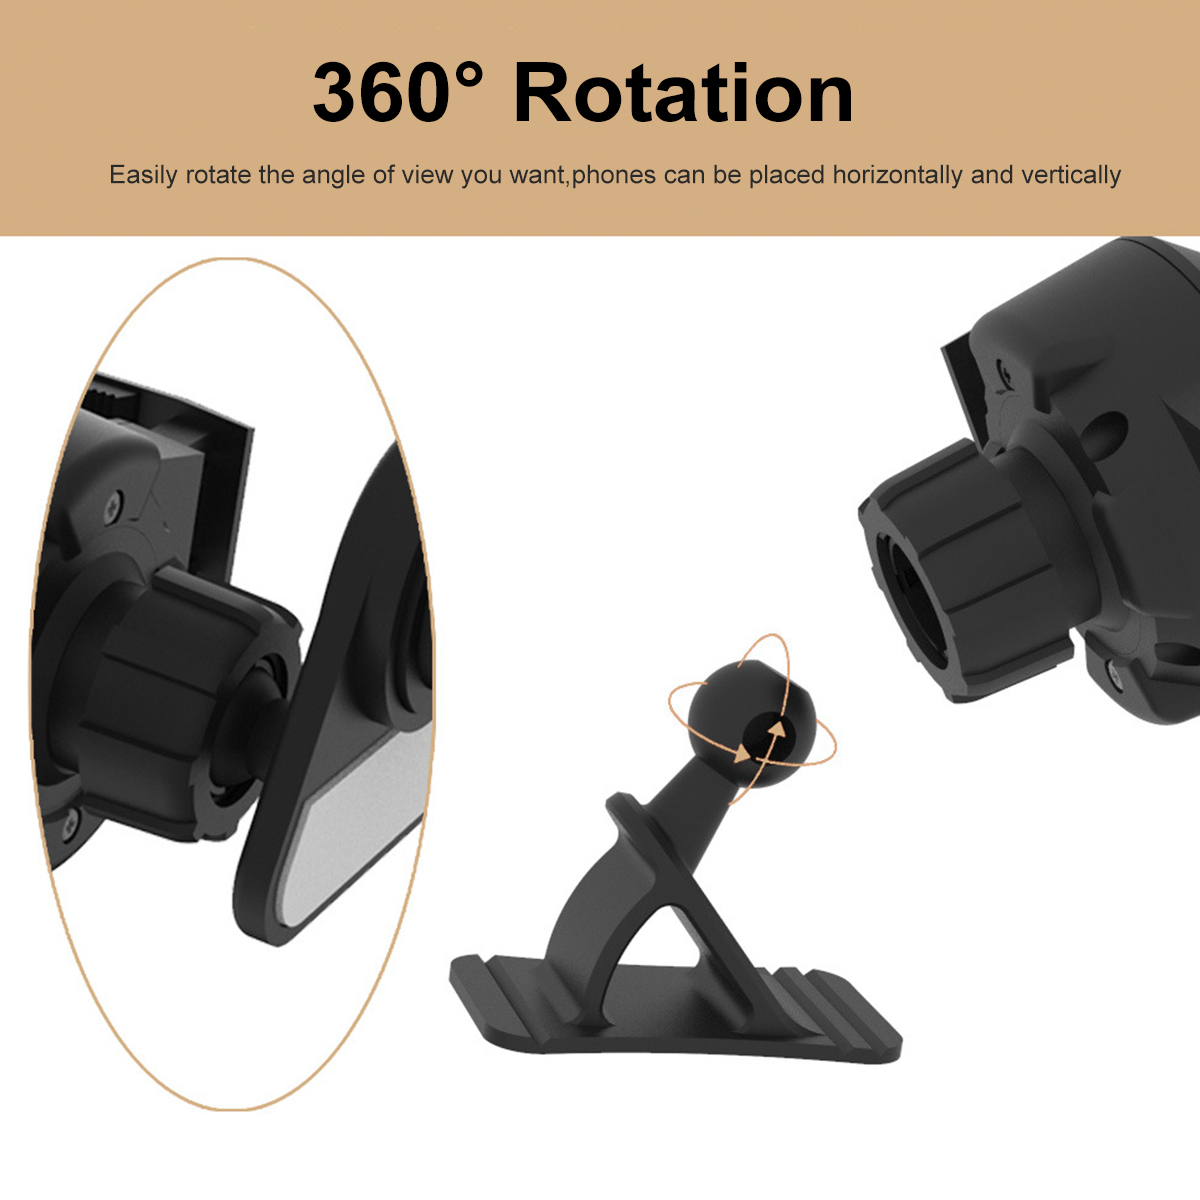 360deg-Rotation-Auto-Lock-Car-Dashboard-Air-Vent-Mobile-Phone-Holder-Stand-Bracket-for-iPhone-12-XS--1821154-3